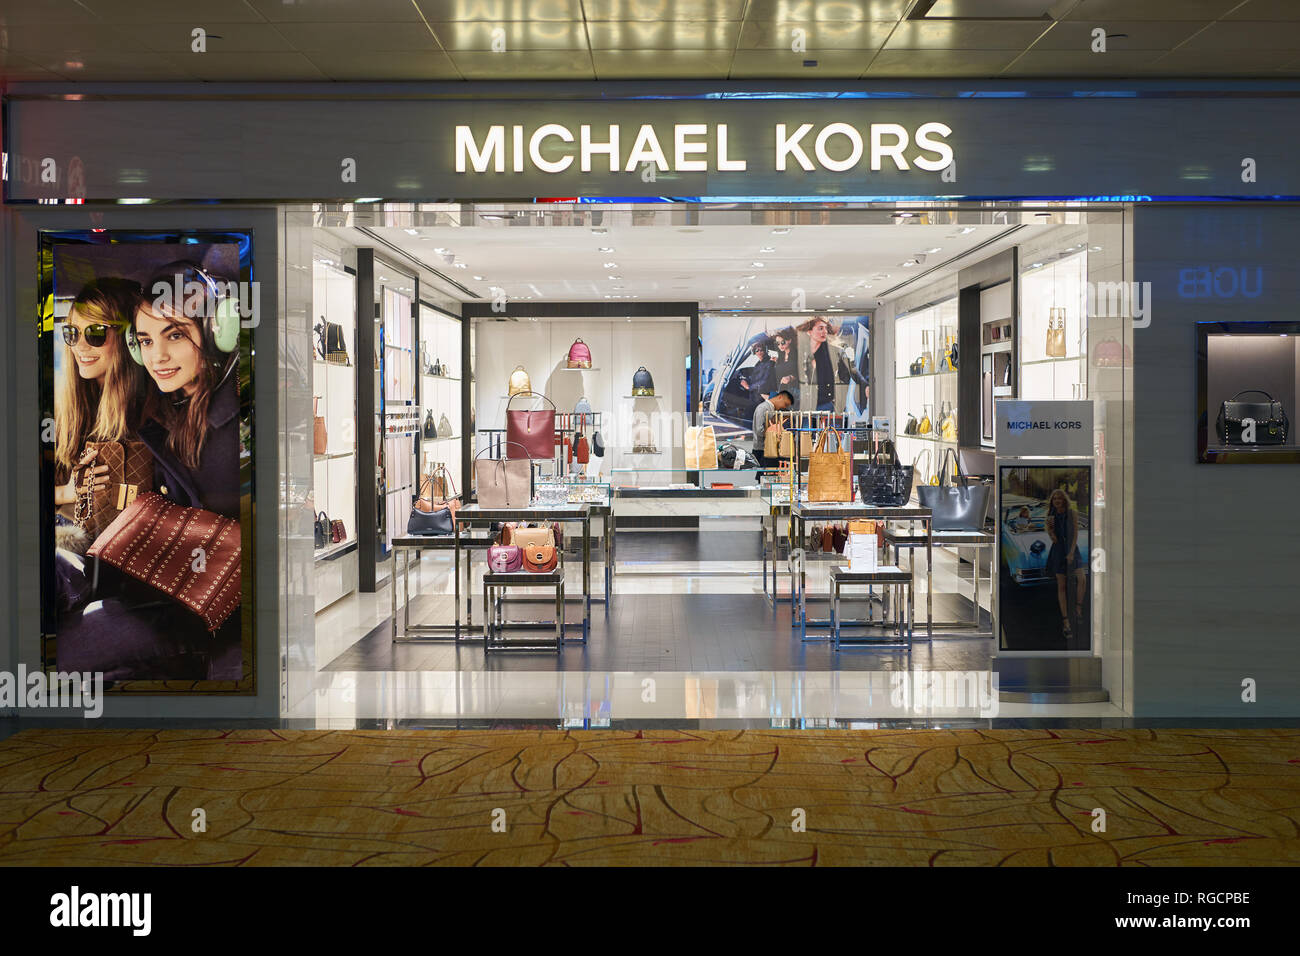 Michael Kors Outlet Store High Resolution Stock Photography and Images -  Alamy